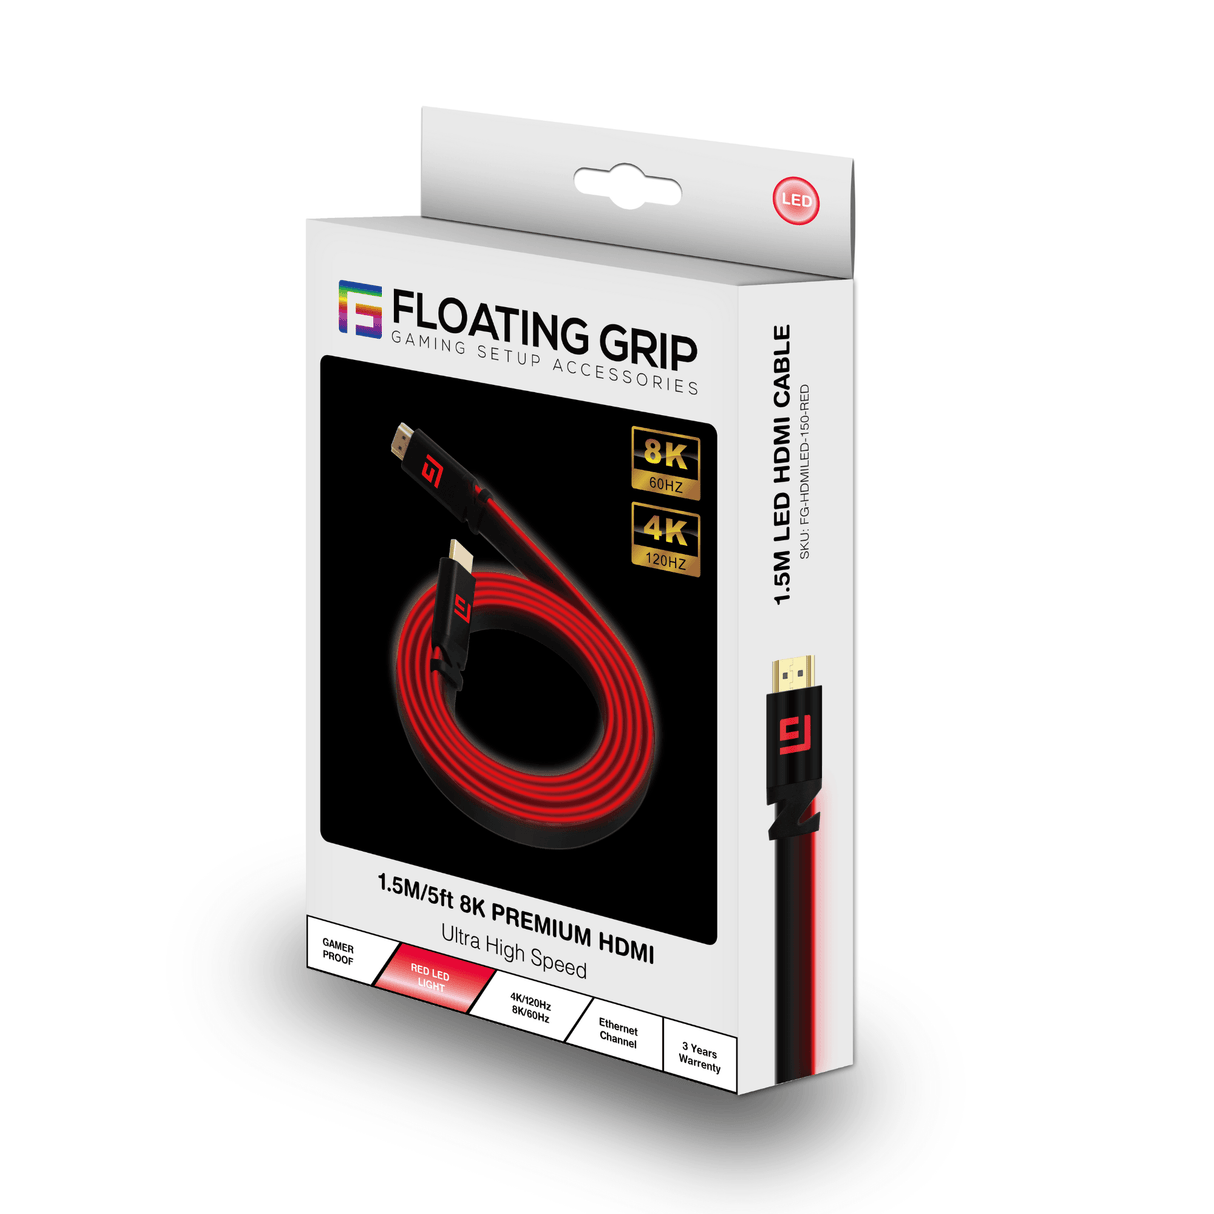 Premium 1.5M/5ft HDMI Cable | Ultra High-Speed Performance and LED Lighting | V2.1 | 8K/60Hz - FLOATING GRIP